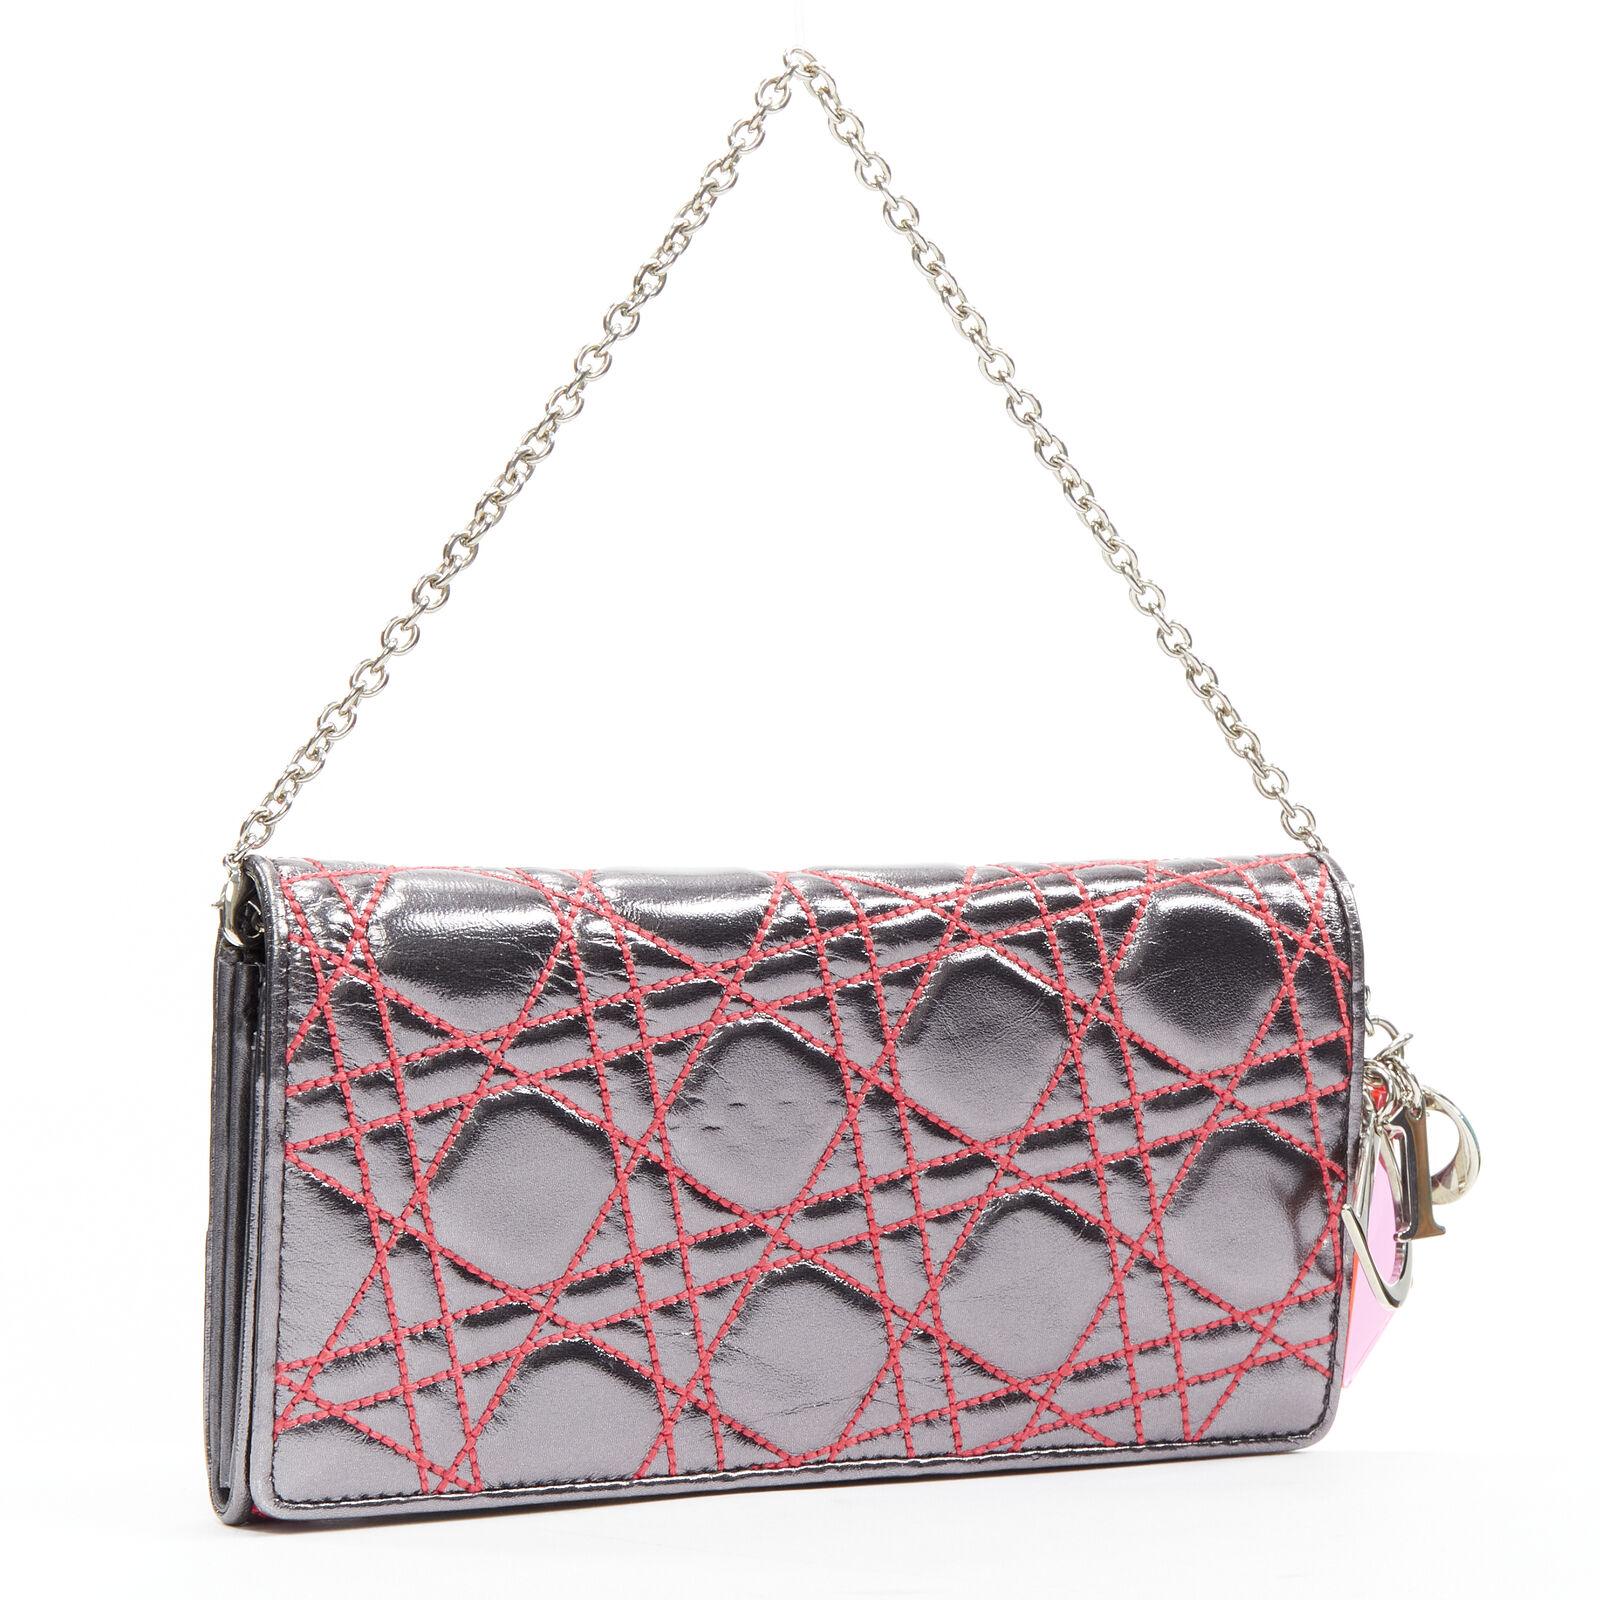 Gray CHRISTIAN DIOR 2011 Anselm Reyle silver neon pink Cannage wallet on chain bag